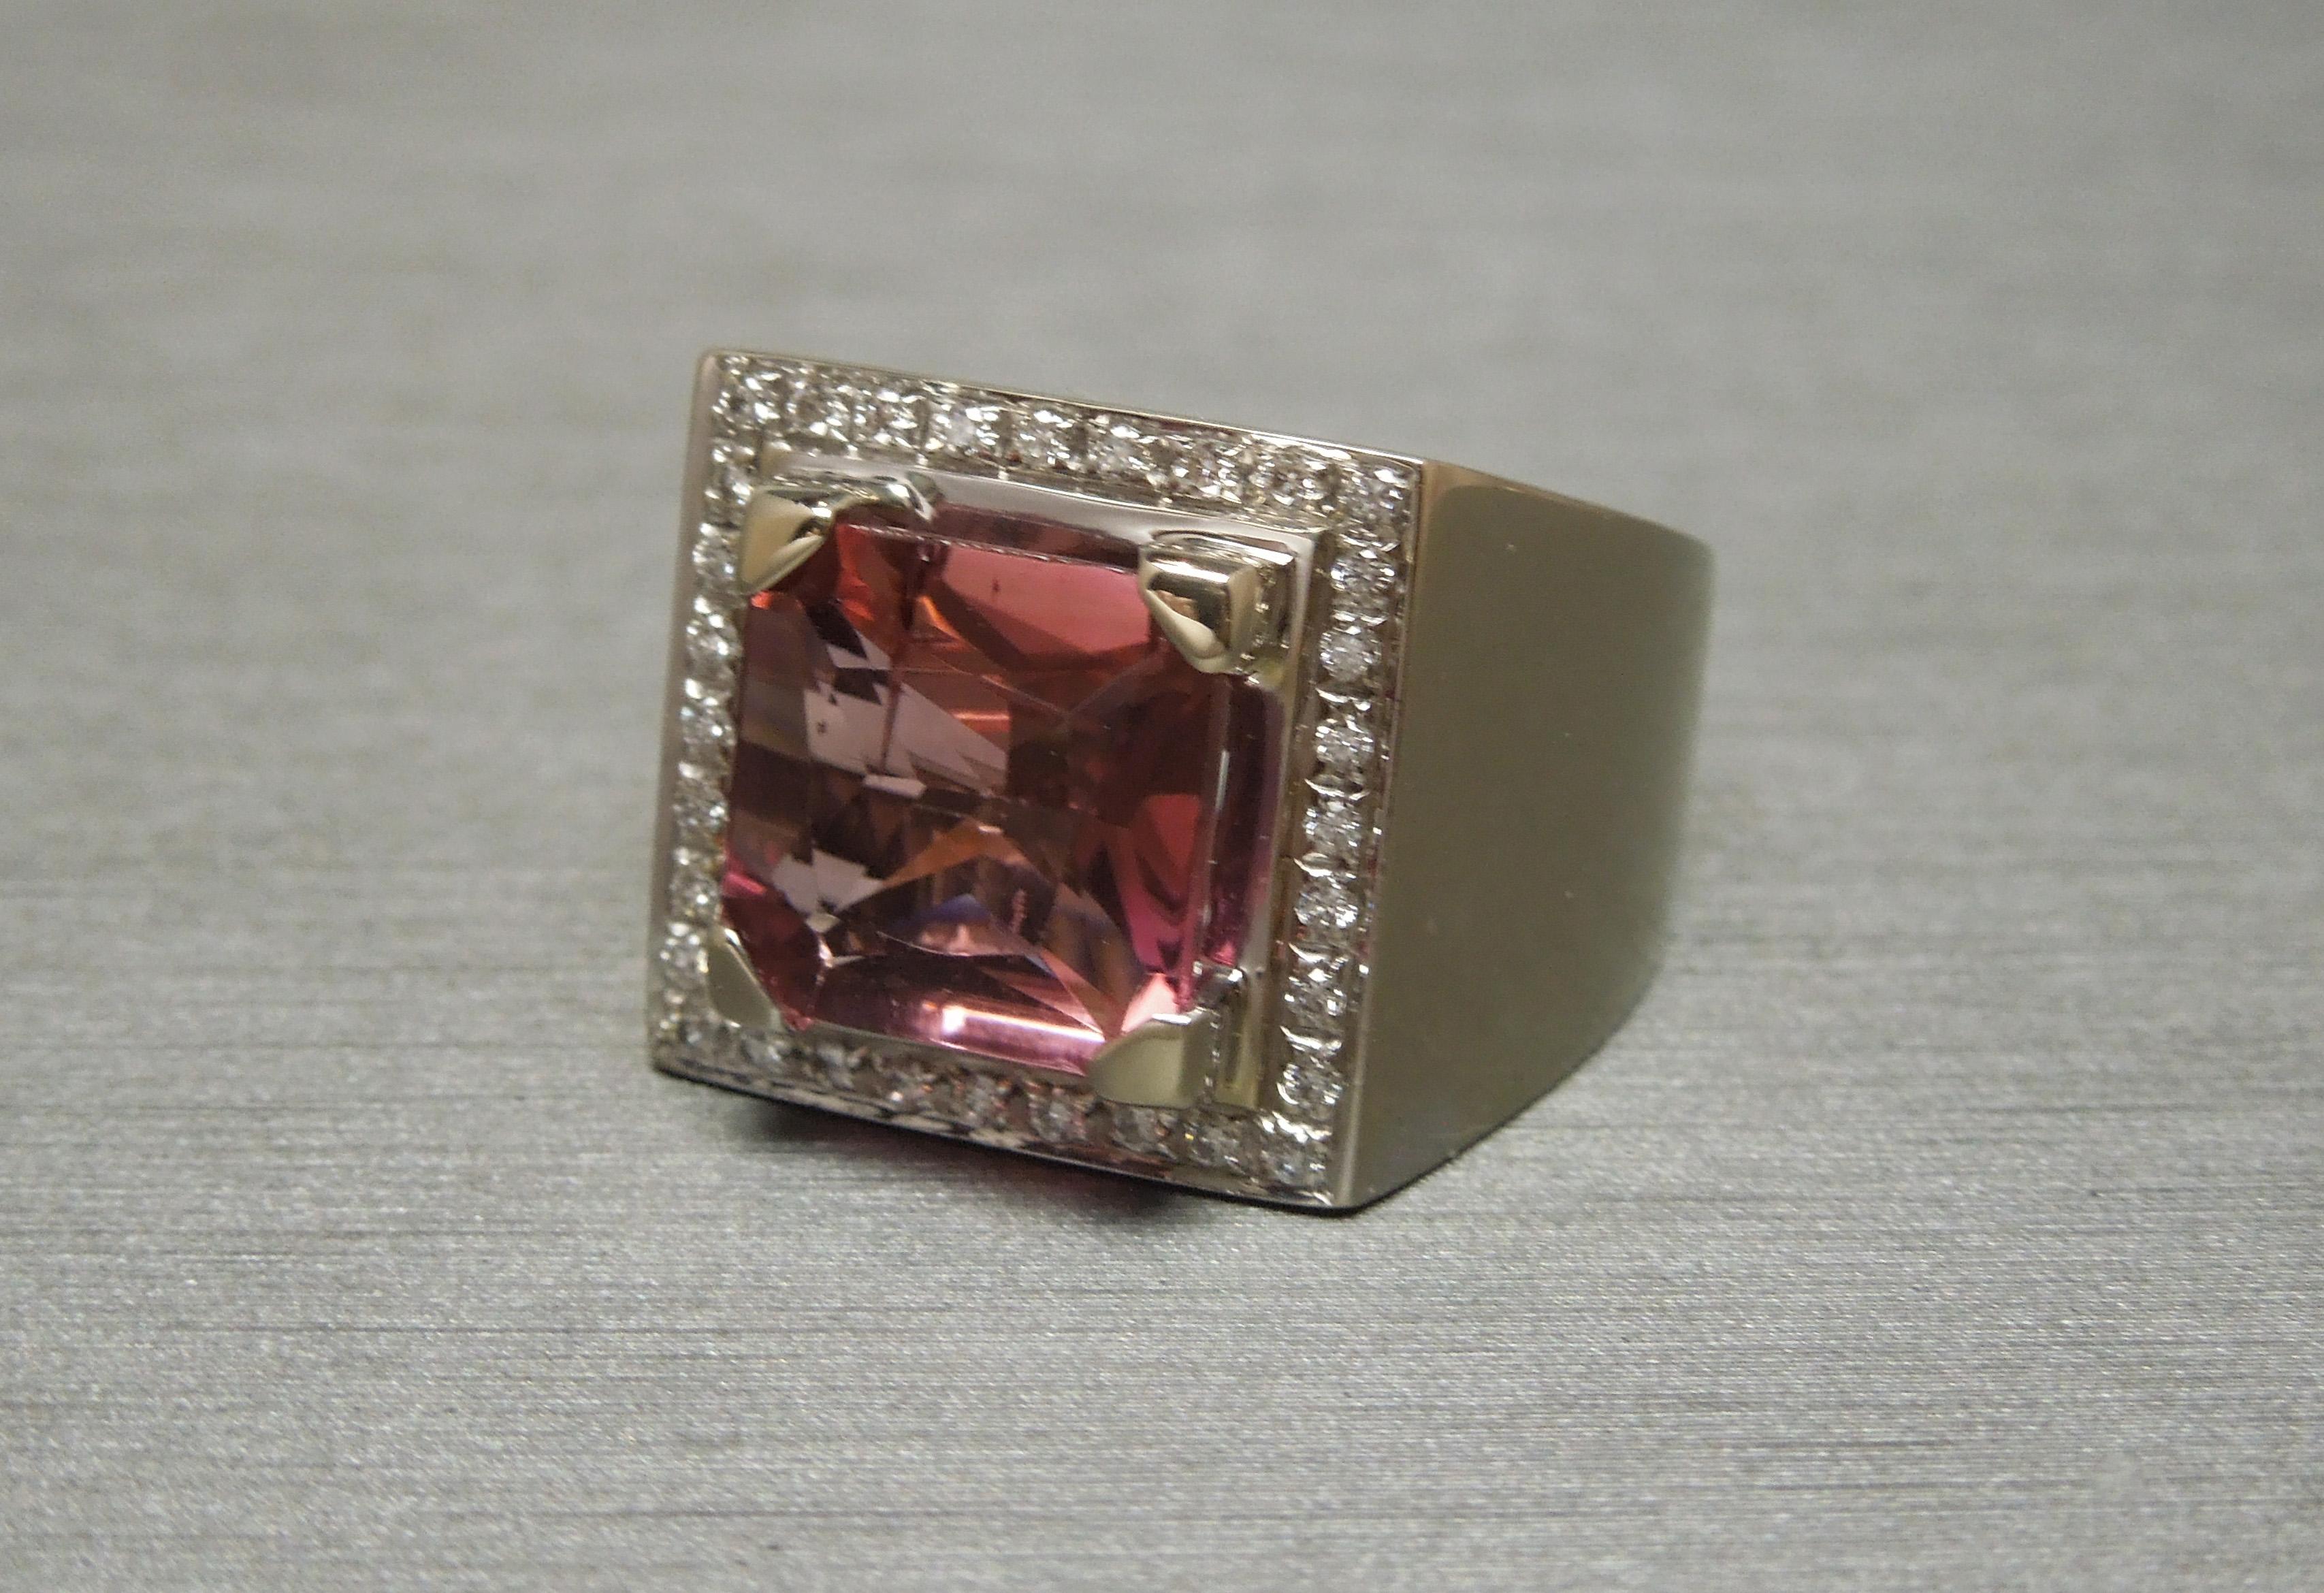 In 18KT White Gold, this European Men's Tourmaline & Diamond ring features a central Square cut 4 carat Natural Salmon colored Tourmaline at 10mm x 10mm, securely set in 4 Triangle-Shaped prongs. Slightly internally included with 2 minute inclusions